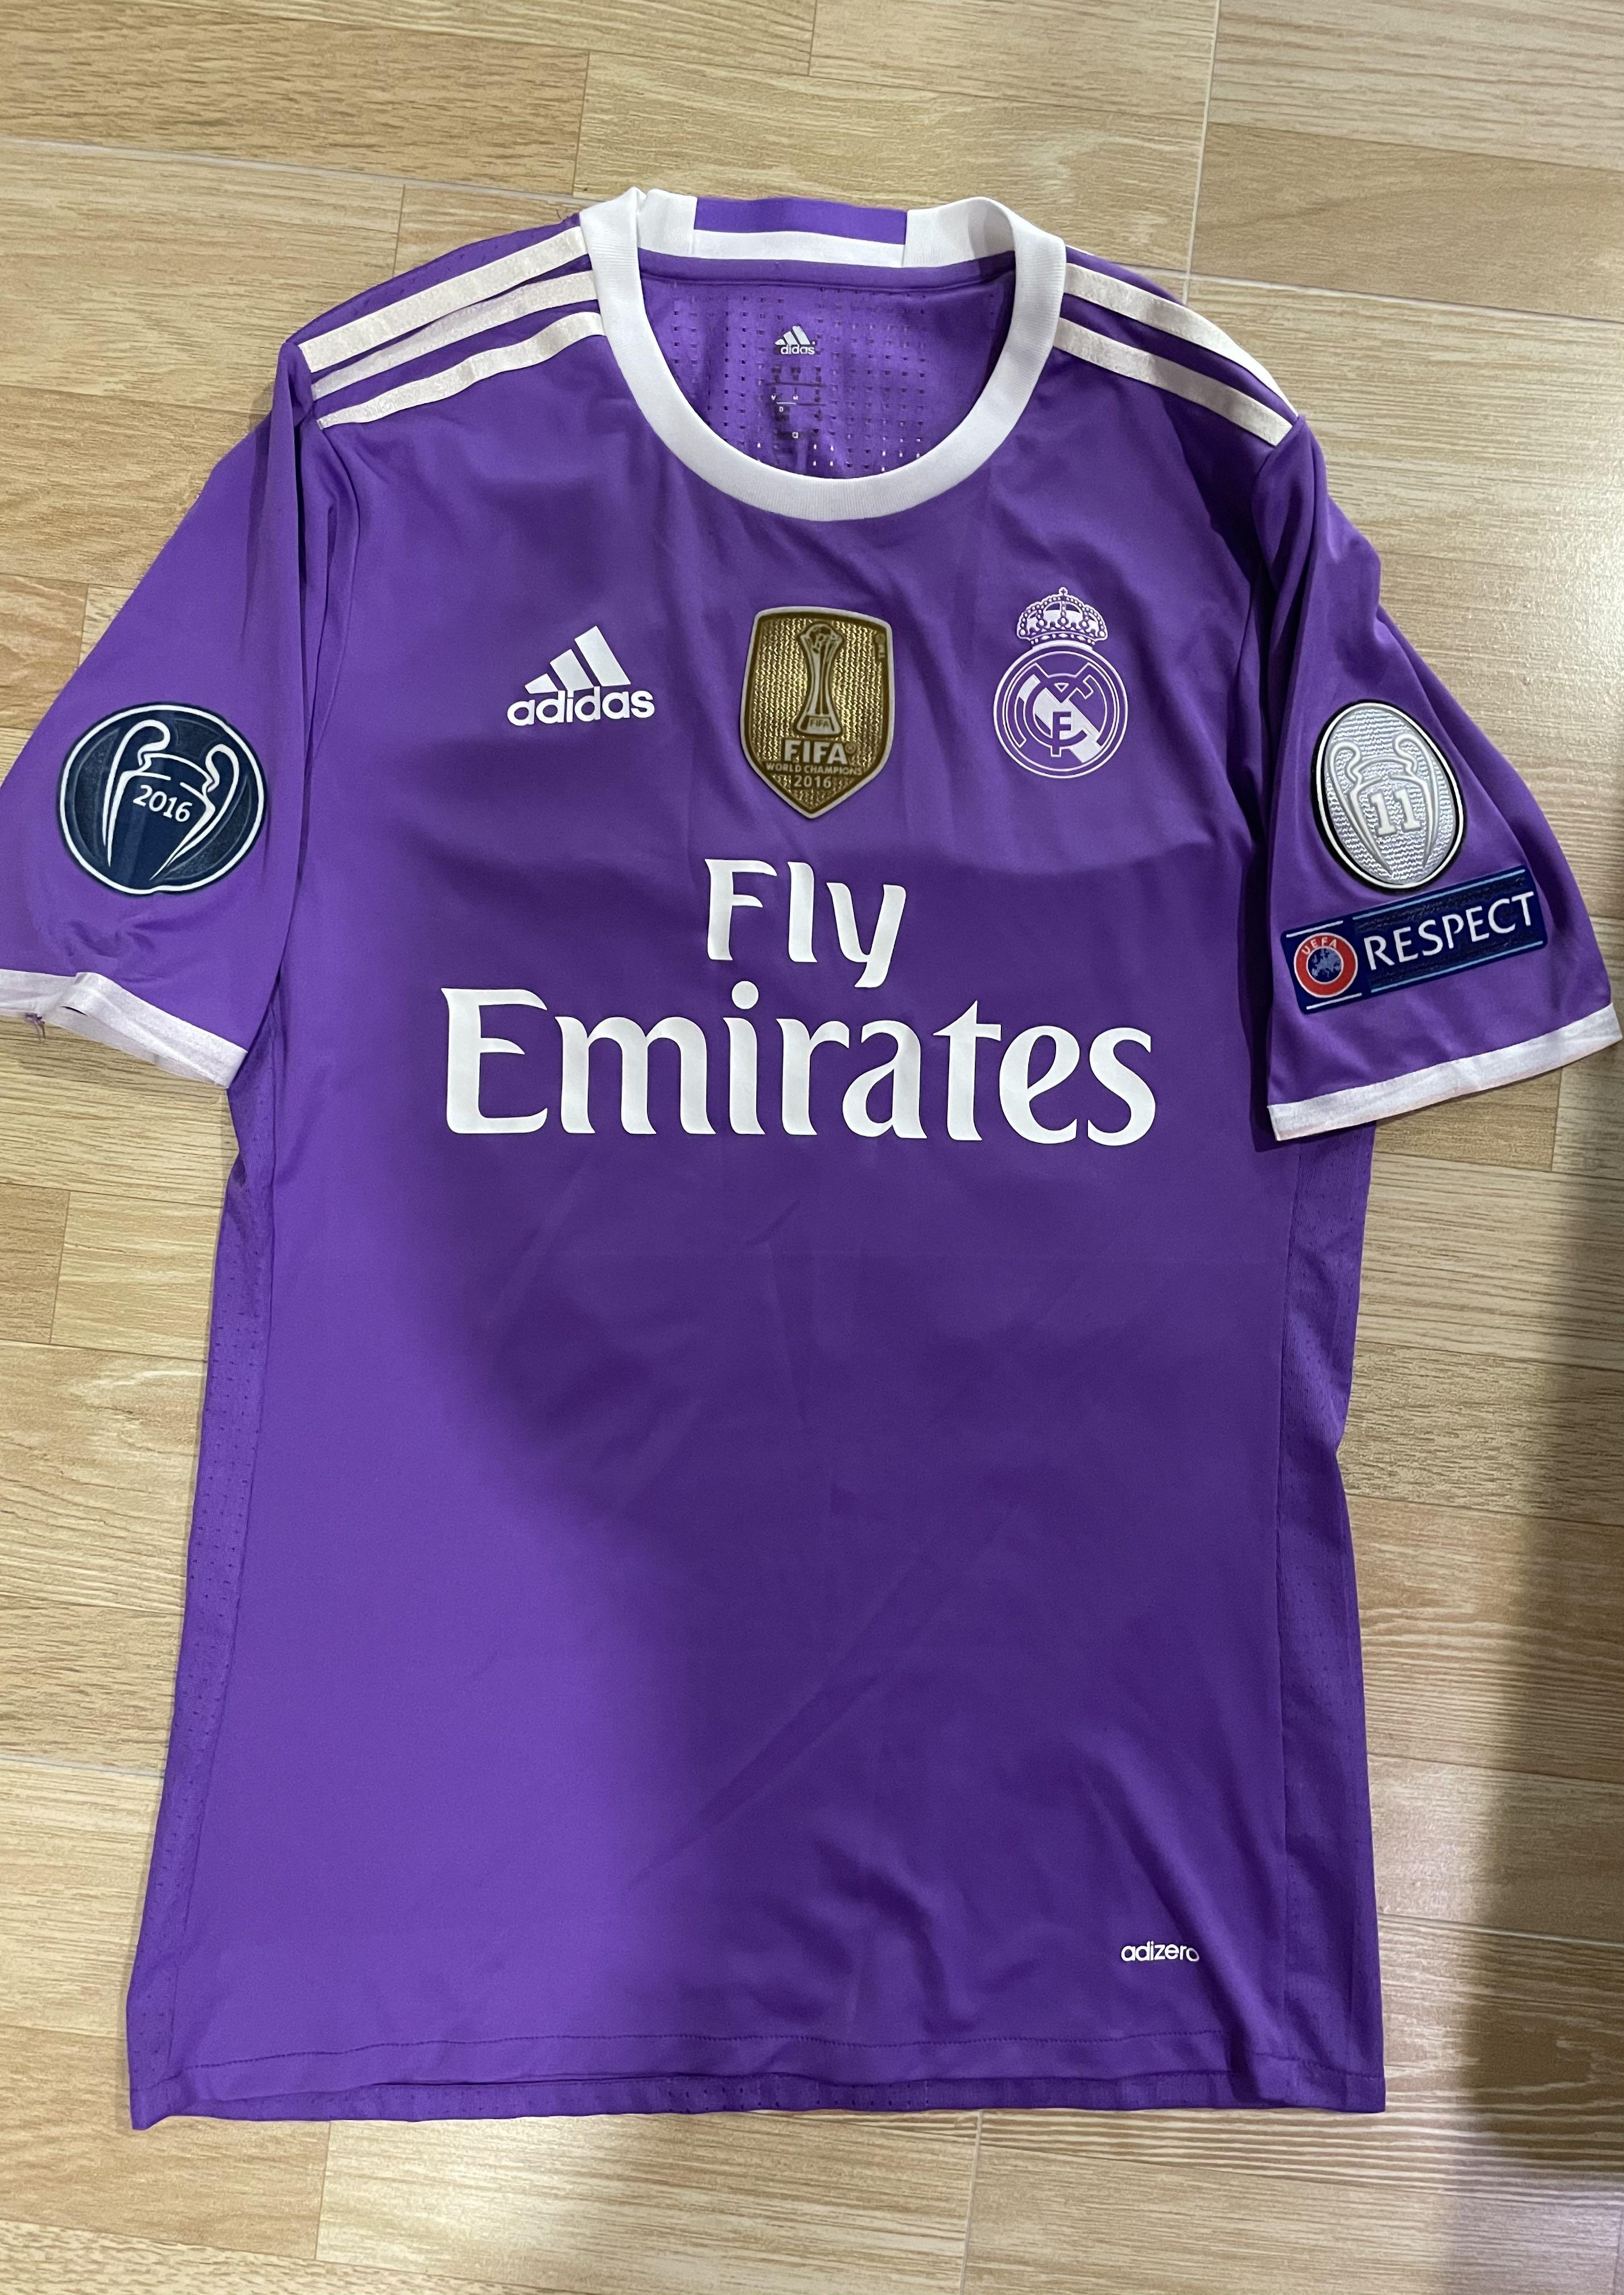 Real Madrid home jersey 2016/17 - youth - Bale 11